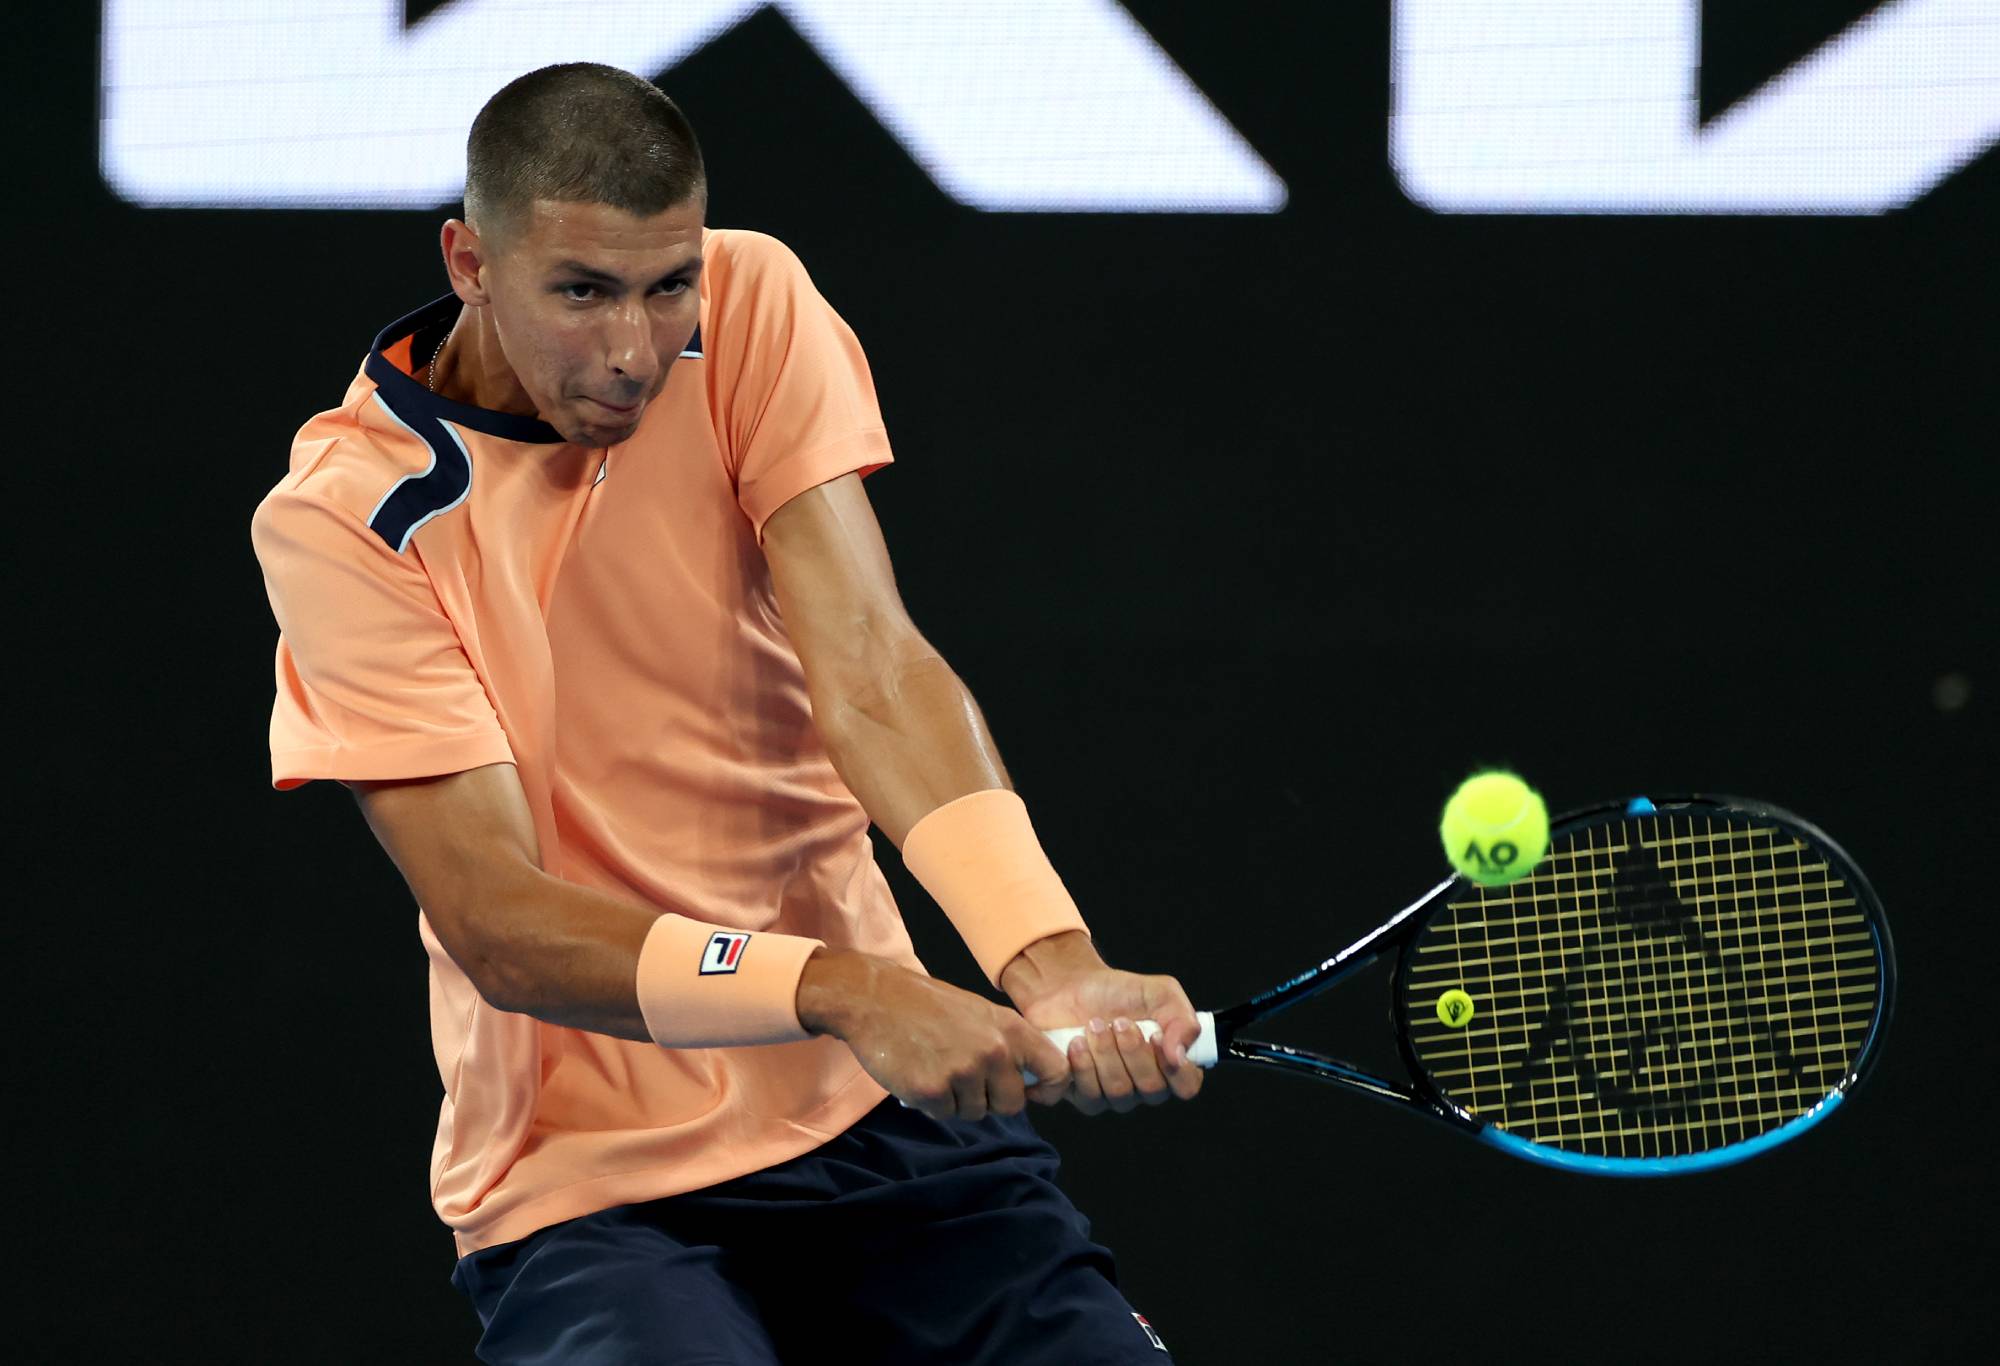 MELBOURNE, AUSTRALIA - JANUARY 17: Alexei Popyrin of Australia plays a backhand in their round one singles match against Chun-Hsin Tseng of Taiwan during day two of the 2023 Australian Open at Melbourne Park on January 17, 2023 in Melbourne, Australia. (Photo by Mackenzie Sweetnam/Getty Images)